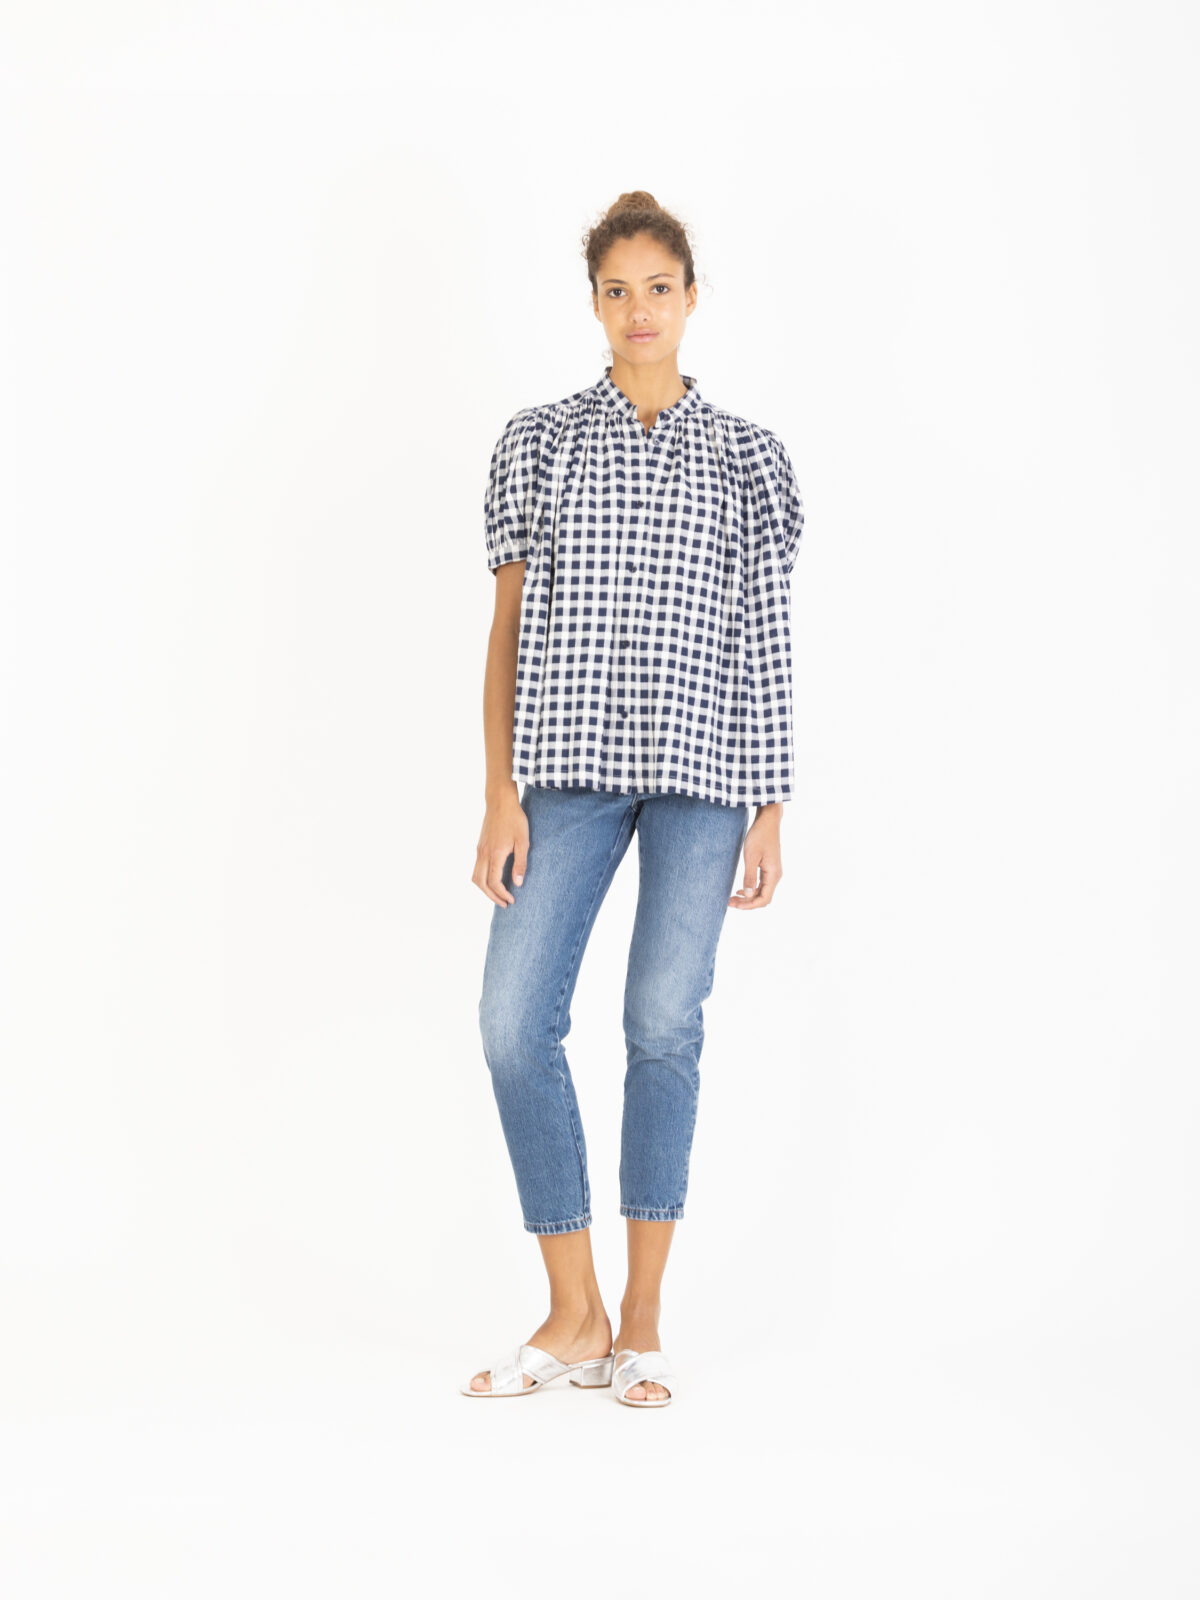 ajmer-shirt-checked-cotton-short-sleeves-pleats-band-collar-laurence-bras-matchboxathens